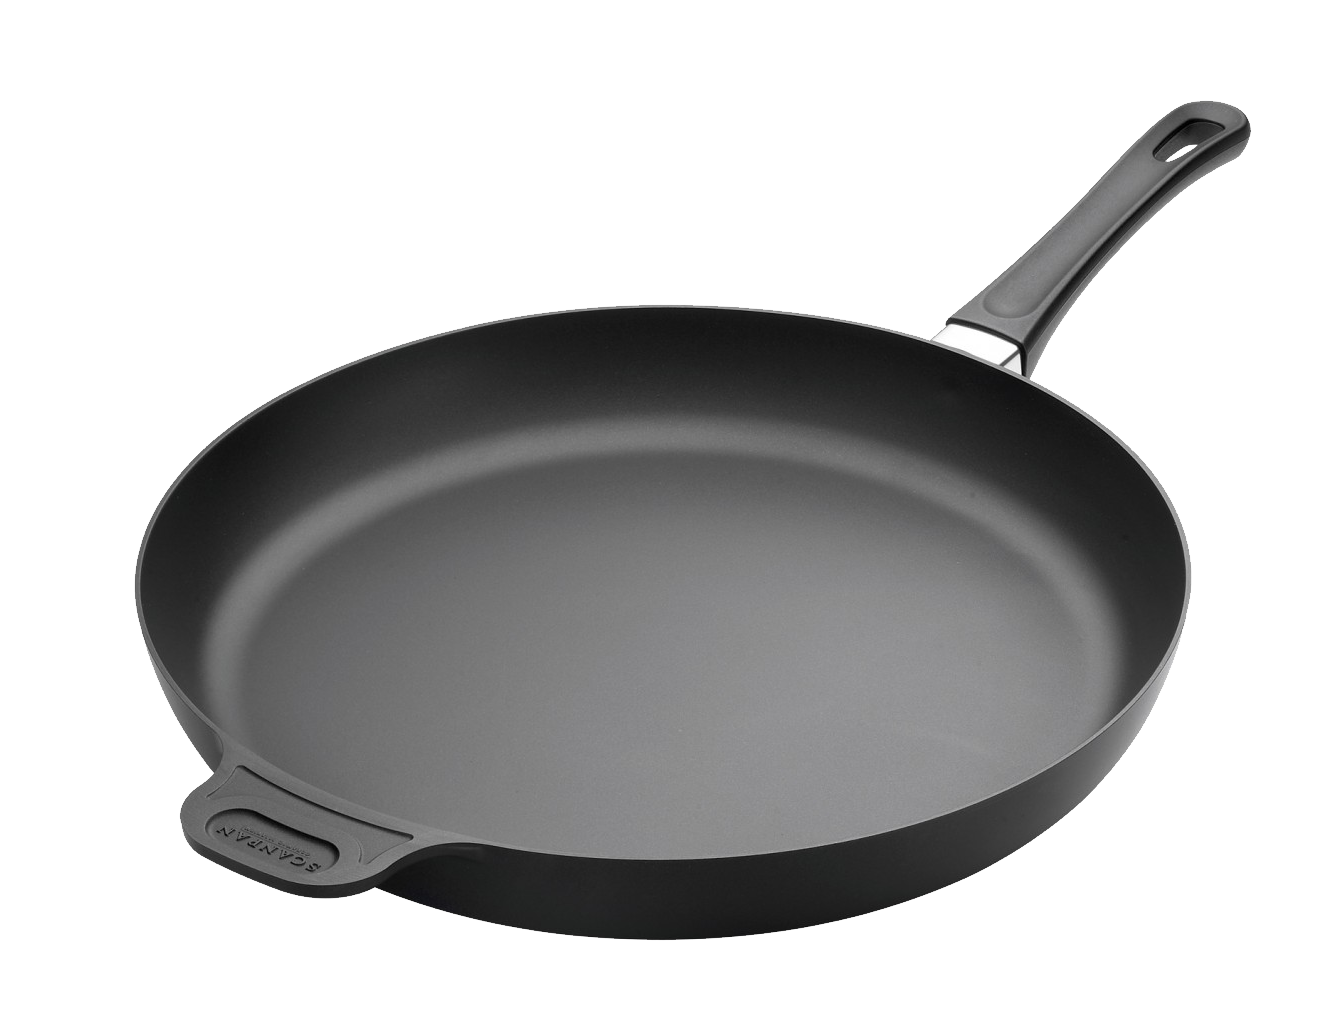 Frying Pan PNG Image in High Definition pngteam.com